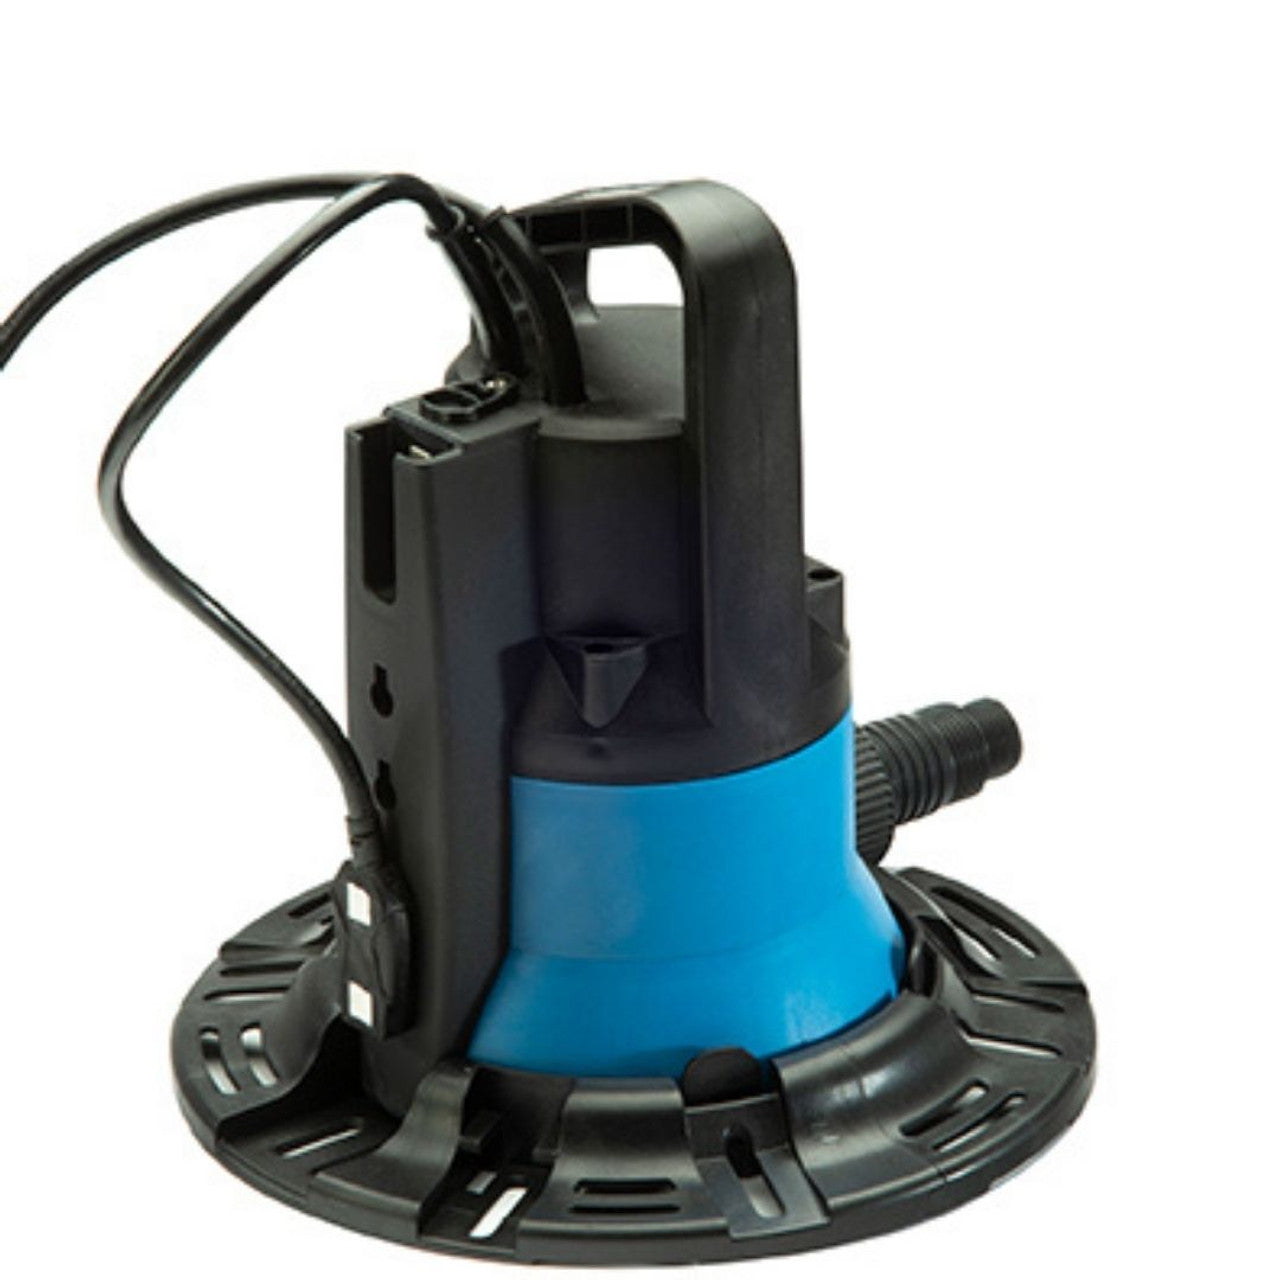 Ocean Blue Submersible Electric Cover Pump - 2400 Gallons Per Hour